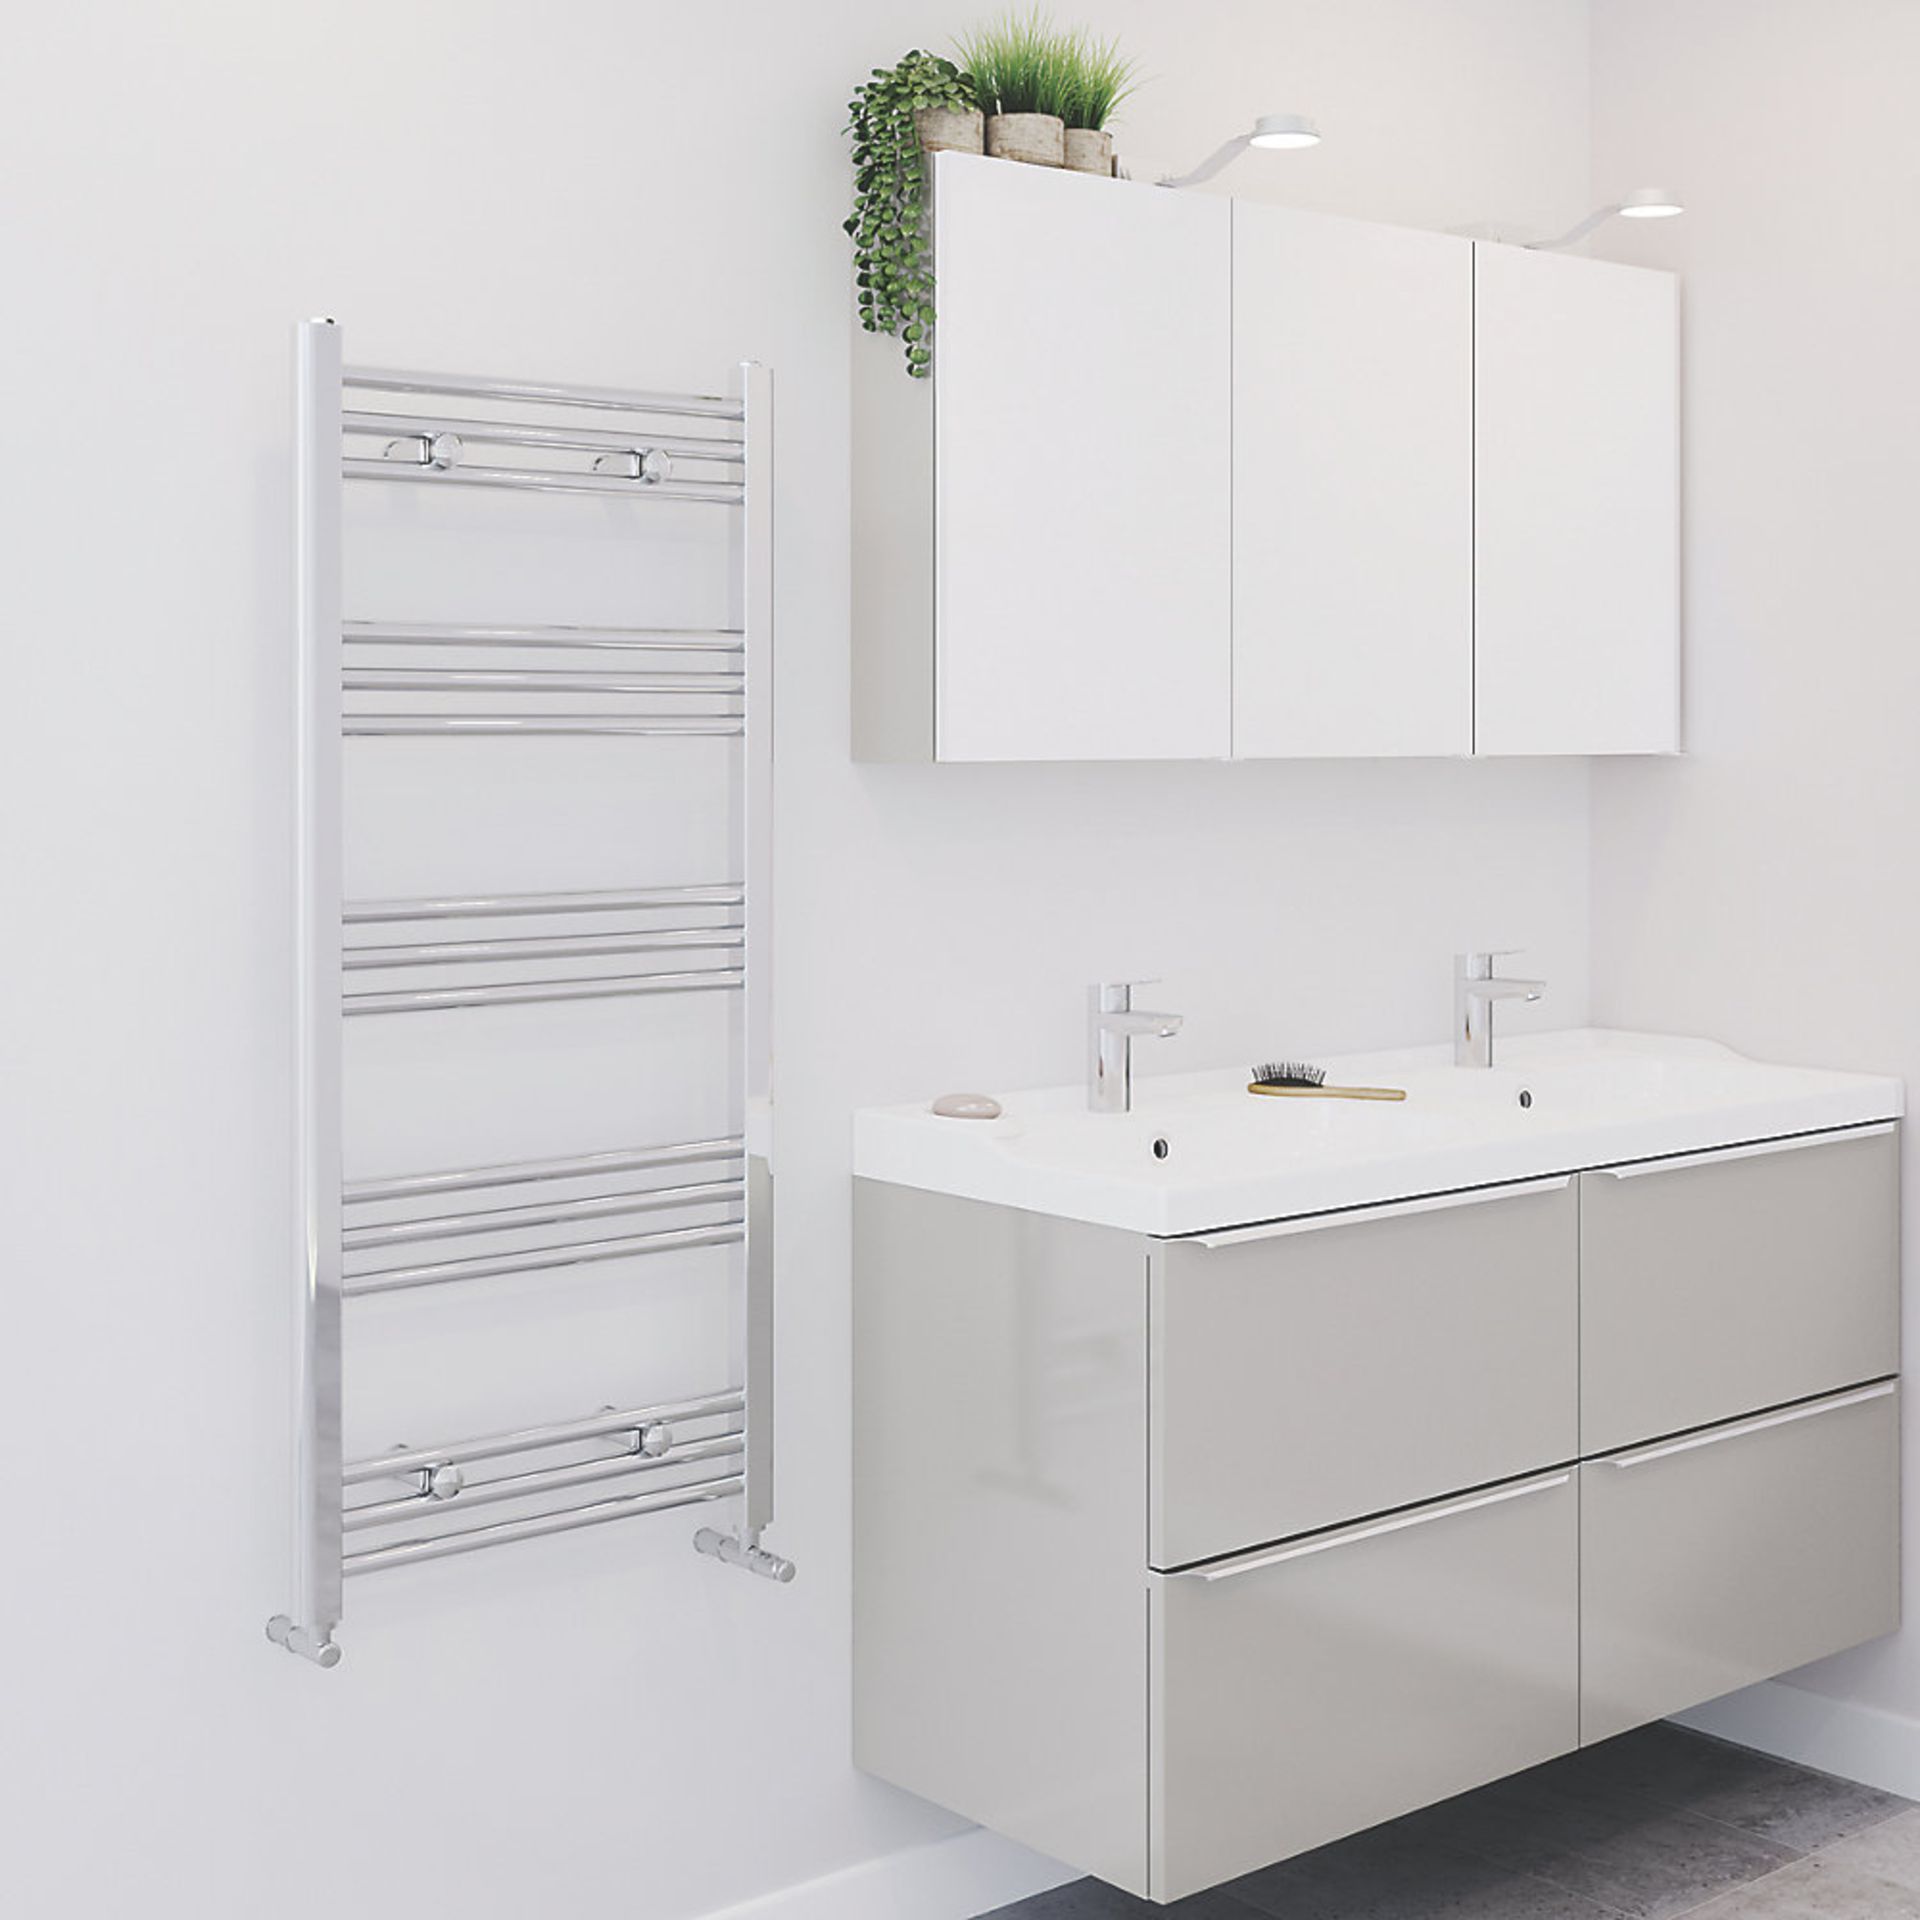 (SA149) 1100 X 500MM TOWEL RADIATOR CHROME. Mild steel construction with a gloss chrome finish. This - Image 2 of 7